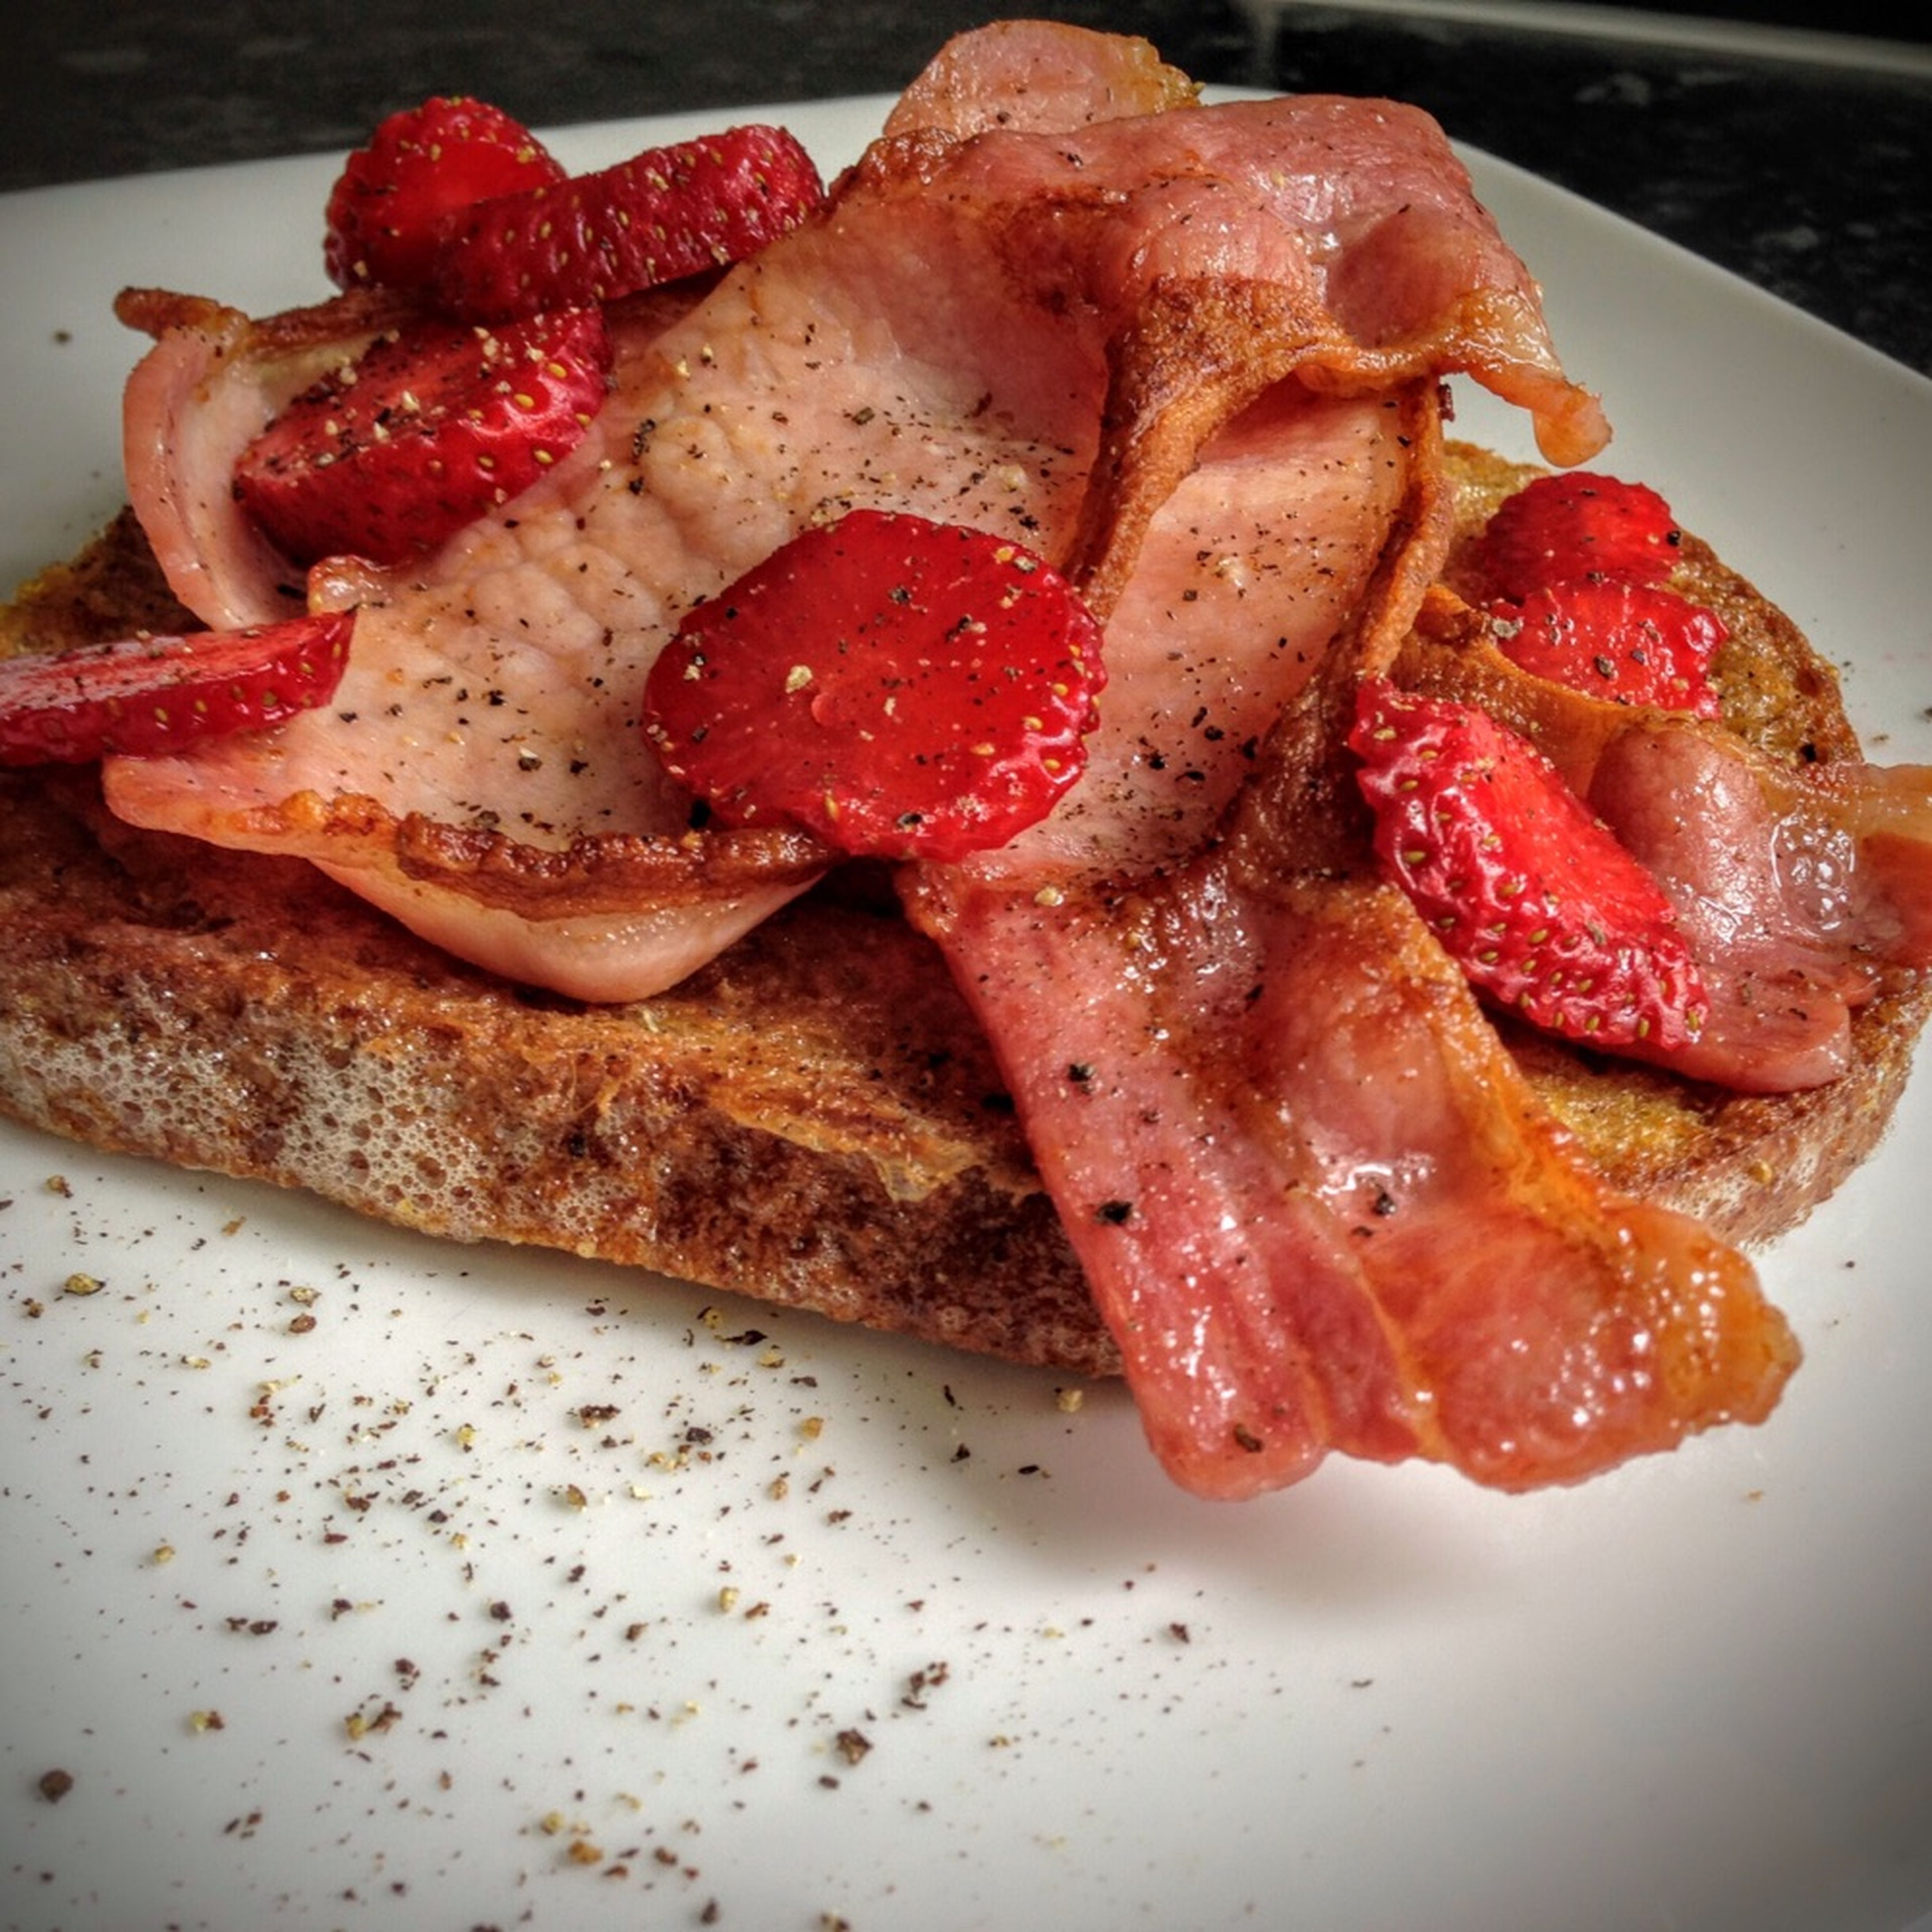 Fry the bread in a little butter until golden brown. Serve with bacon, strawberries, and a little black pepper. Enjoy!